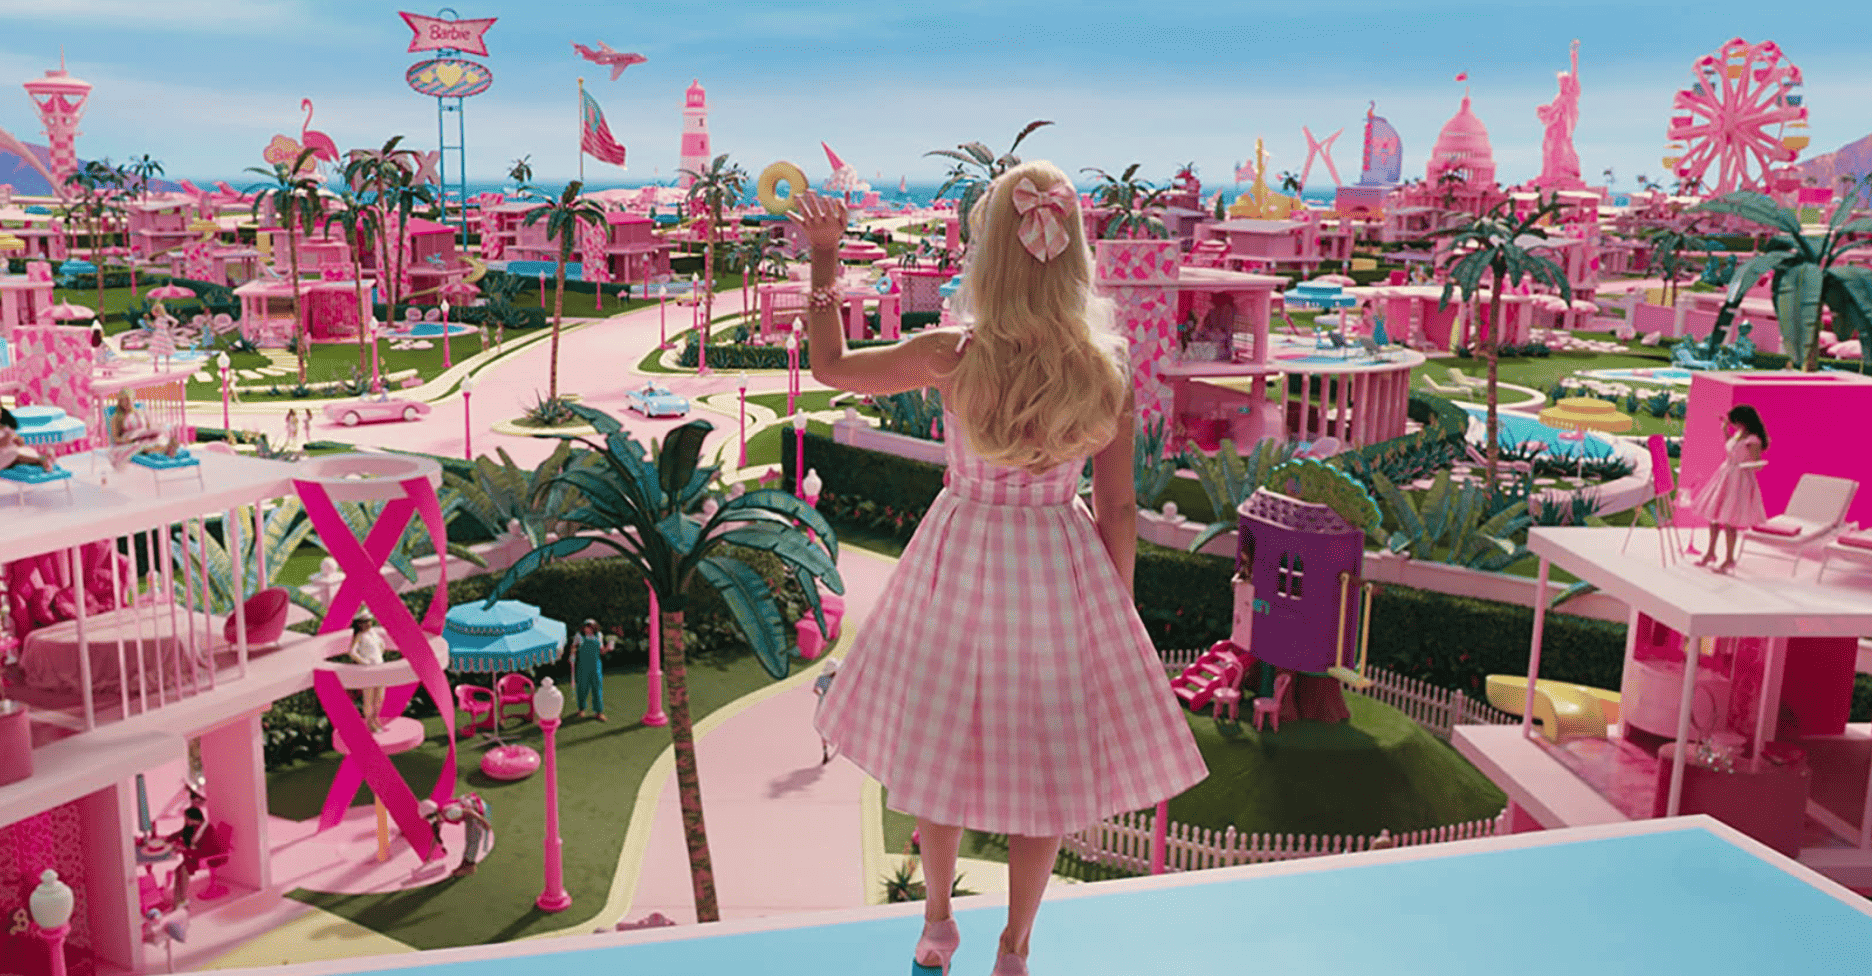 Barbie waves from the rooftop of her dollhouse and presides over the rest of Barbieland in this image from Warner Bros